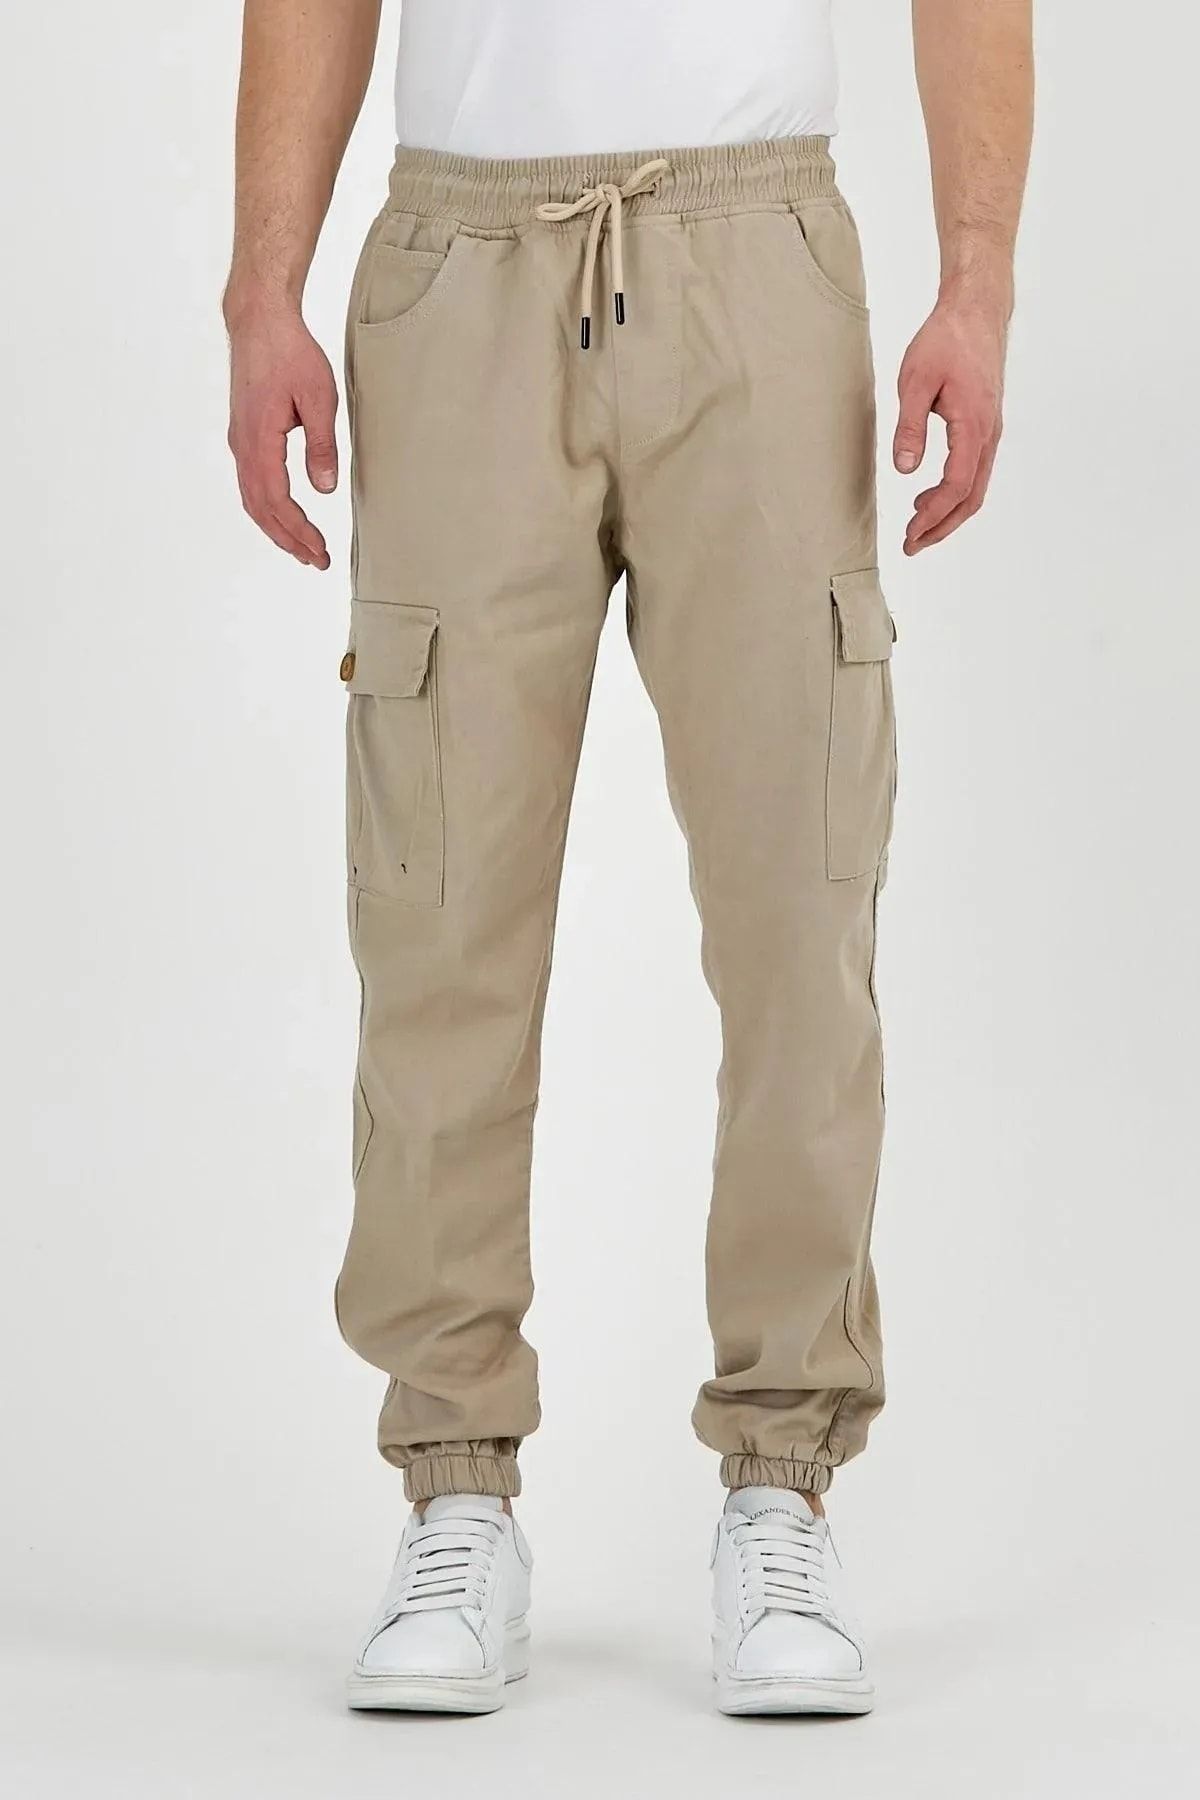 BLG SPORTSWEAR Men's Stone Color Side Pocket Cargo Pants with Elastic Waist  and Legs - Trendyol